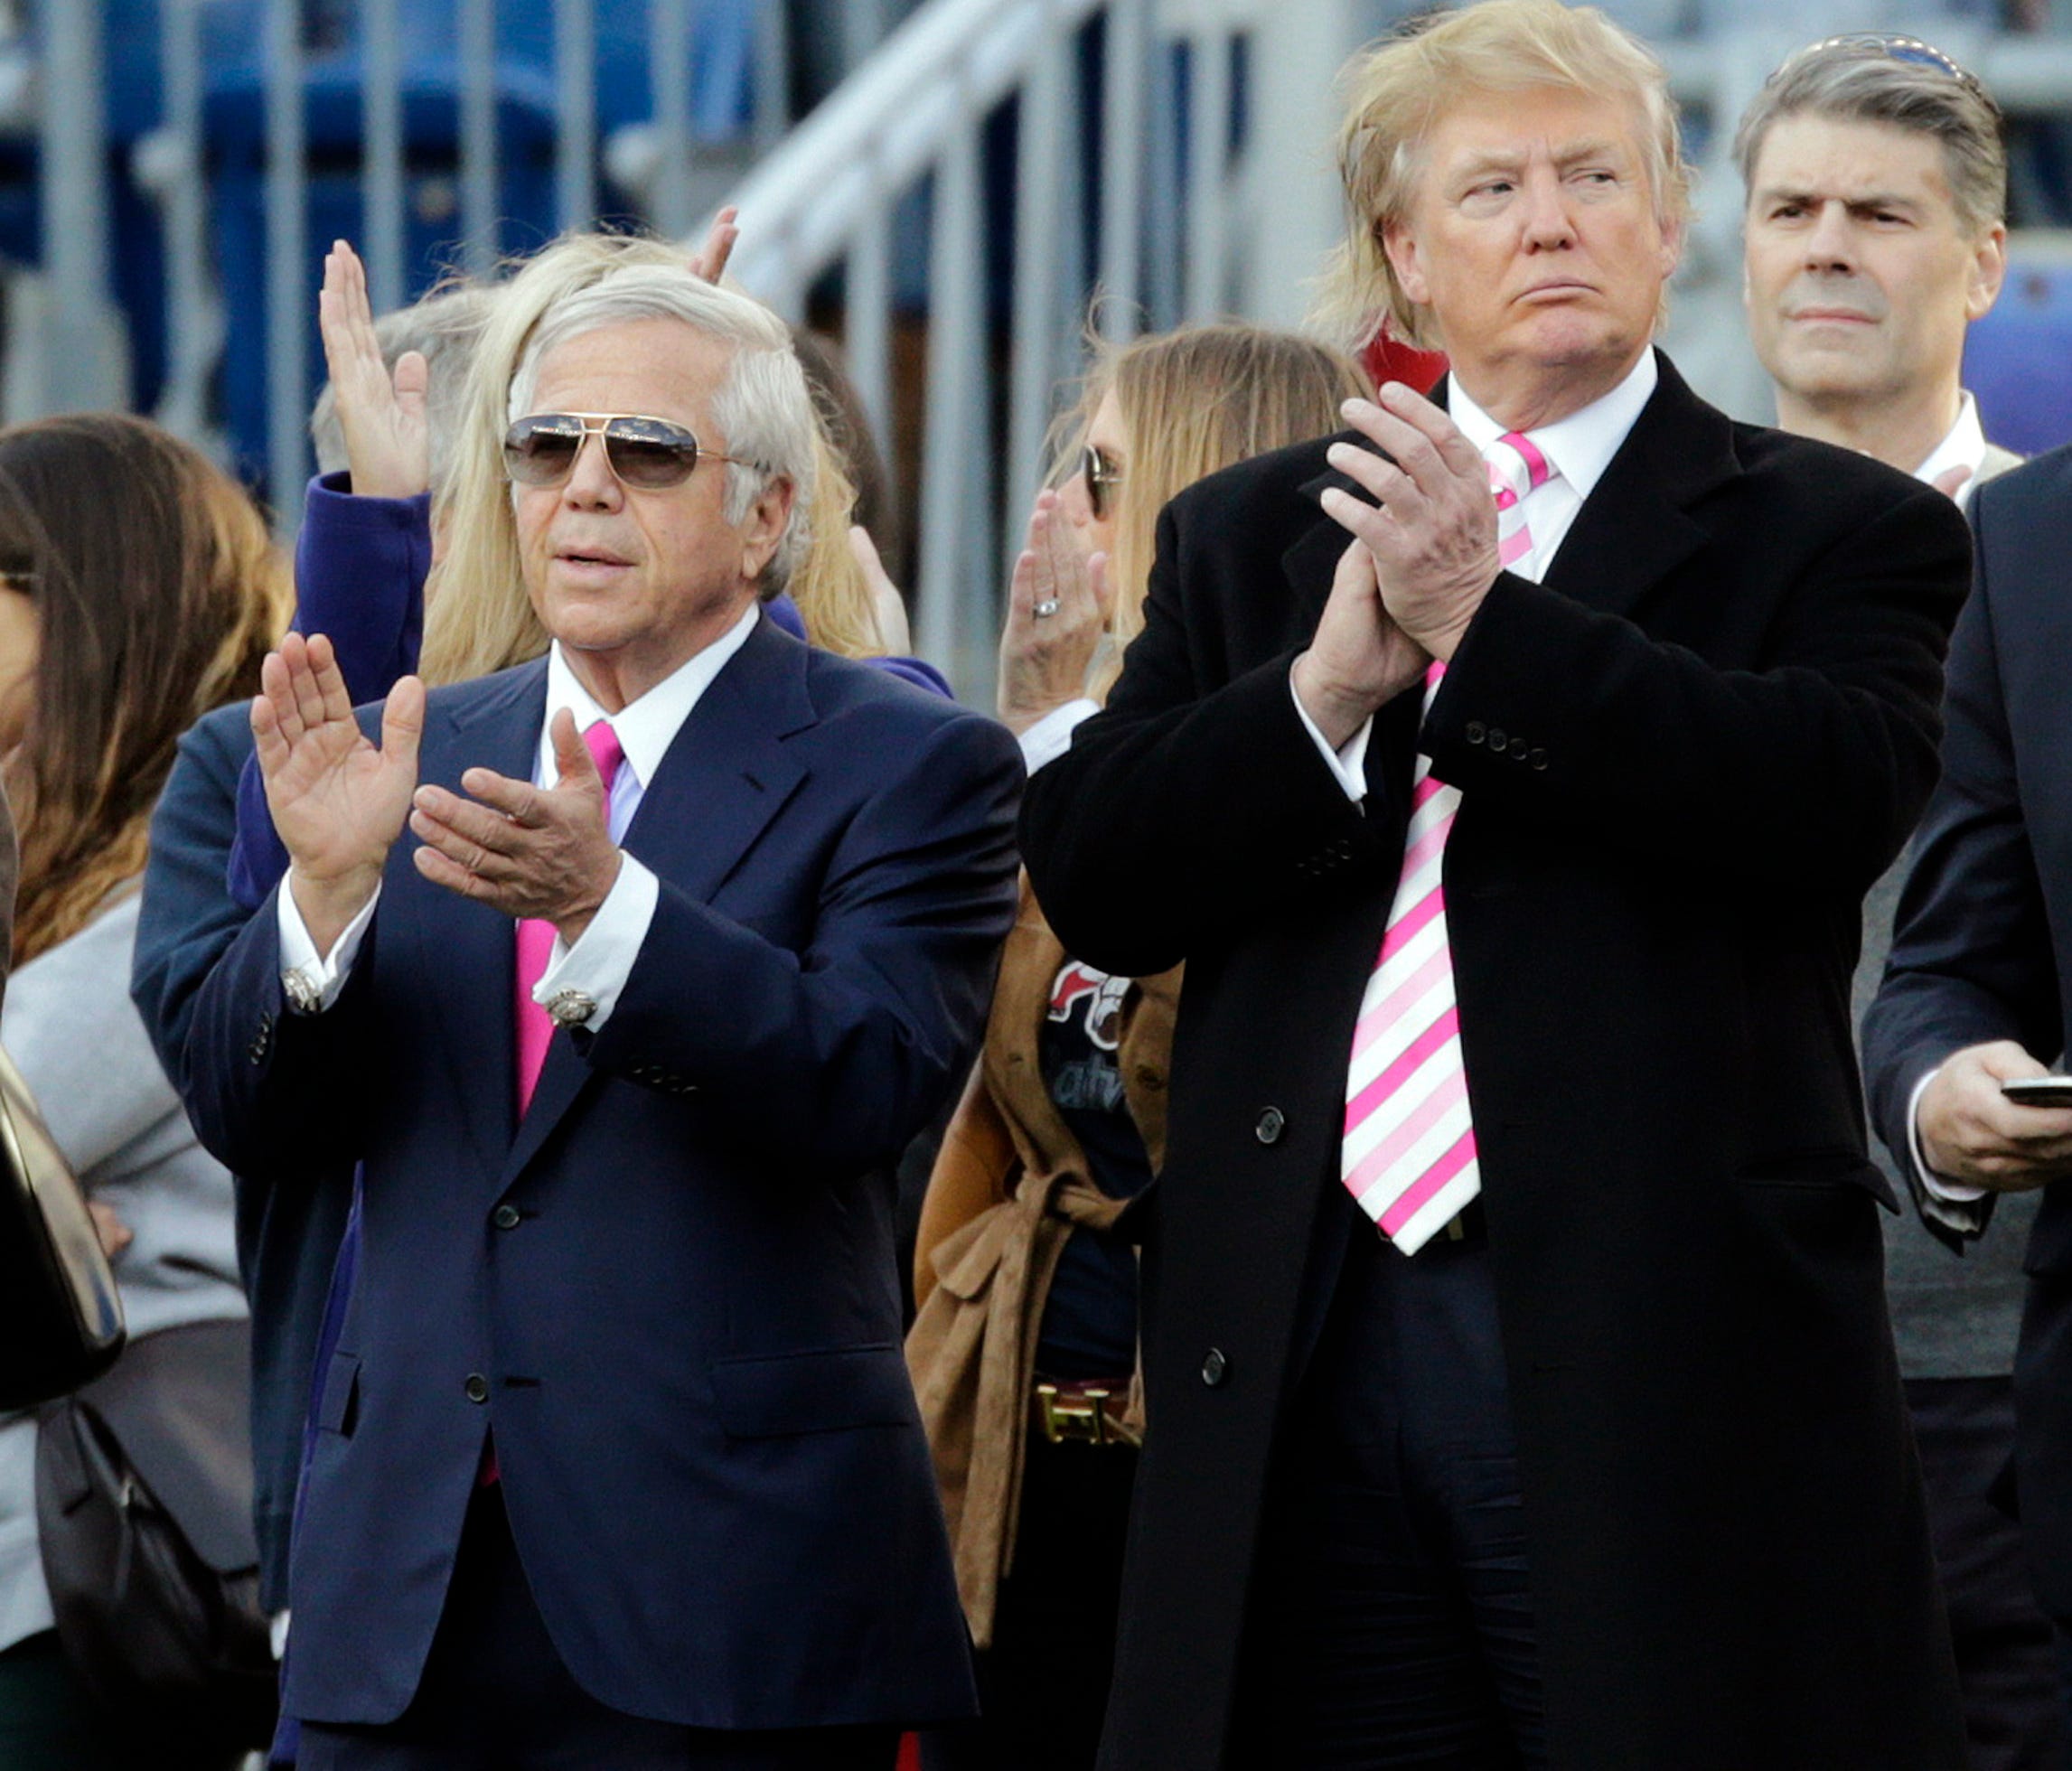 New England Patriots owner Robert Kraft, left, and President Donald Trump, right, applaud on the field before an NFL game back in 2012.